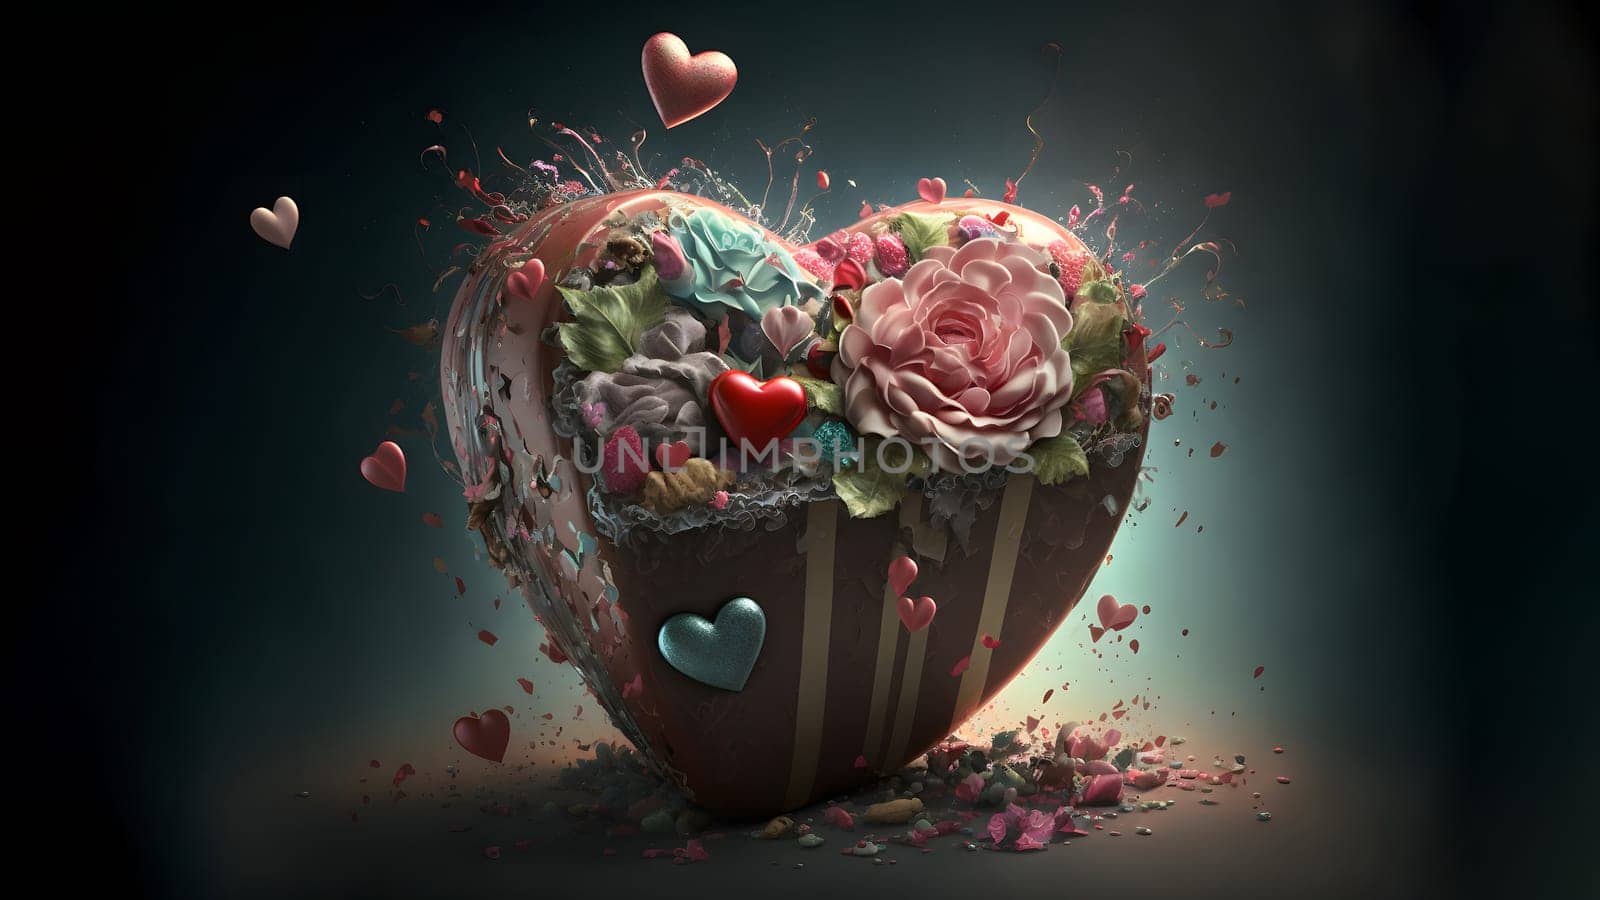 artistically chaotic valentines day heart candy with flowers inside, neural network generated art. Digitally generated image. Not based on any actual person, scene or pattern.